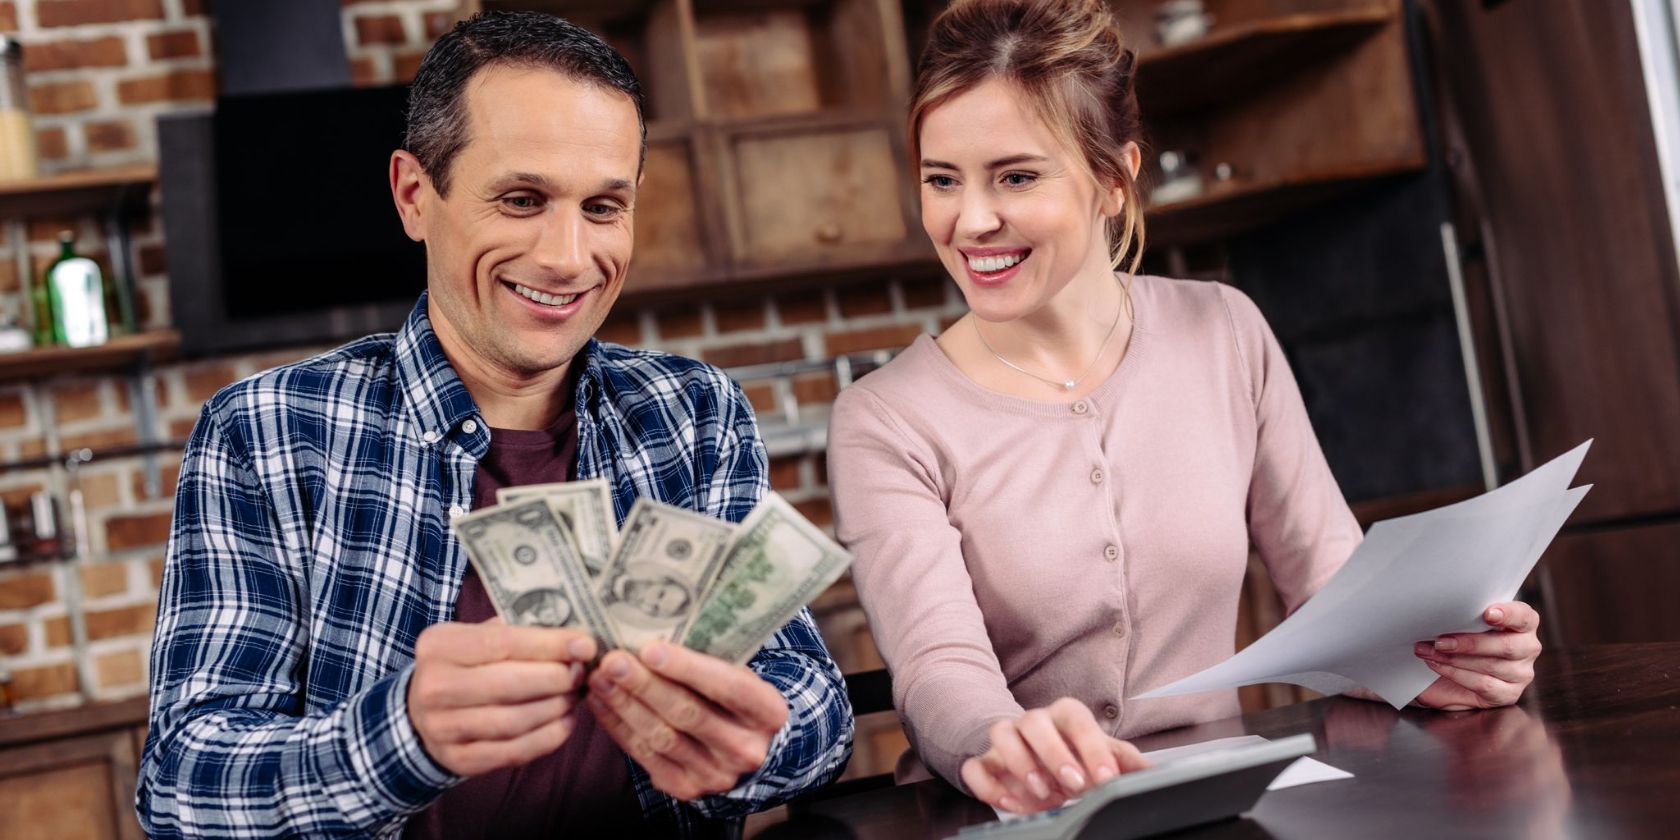 A visual showing a man counting money and a women counting on calculator